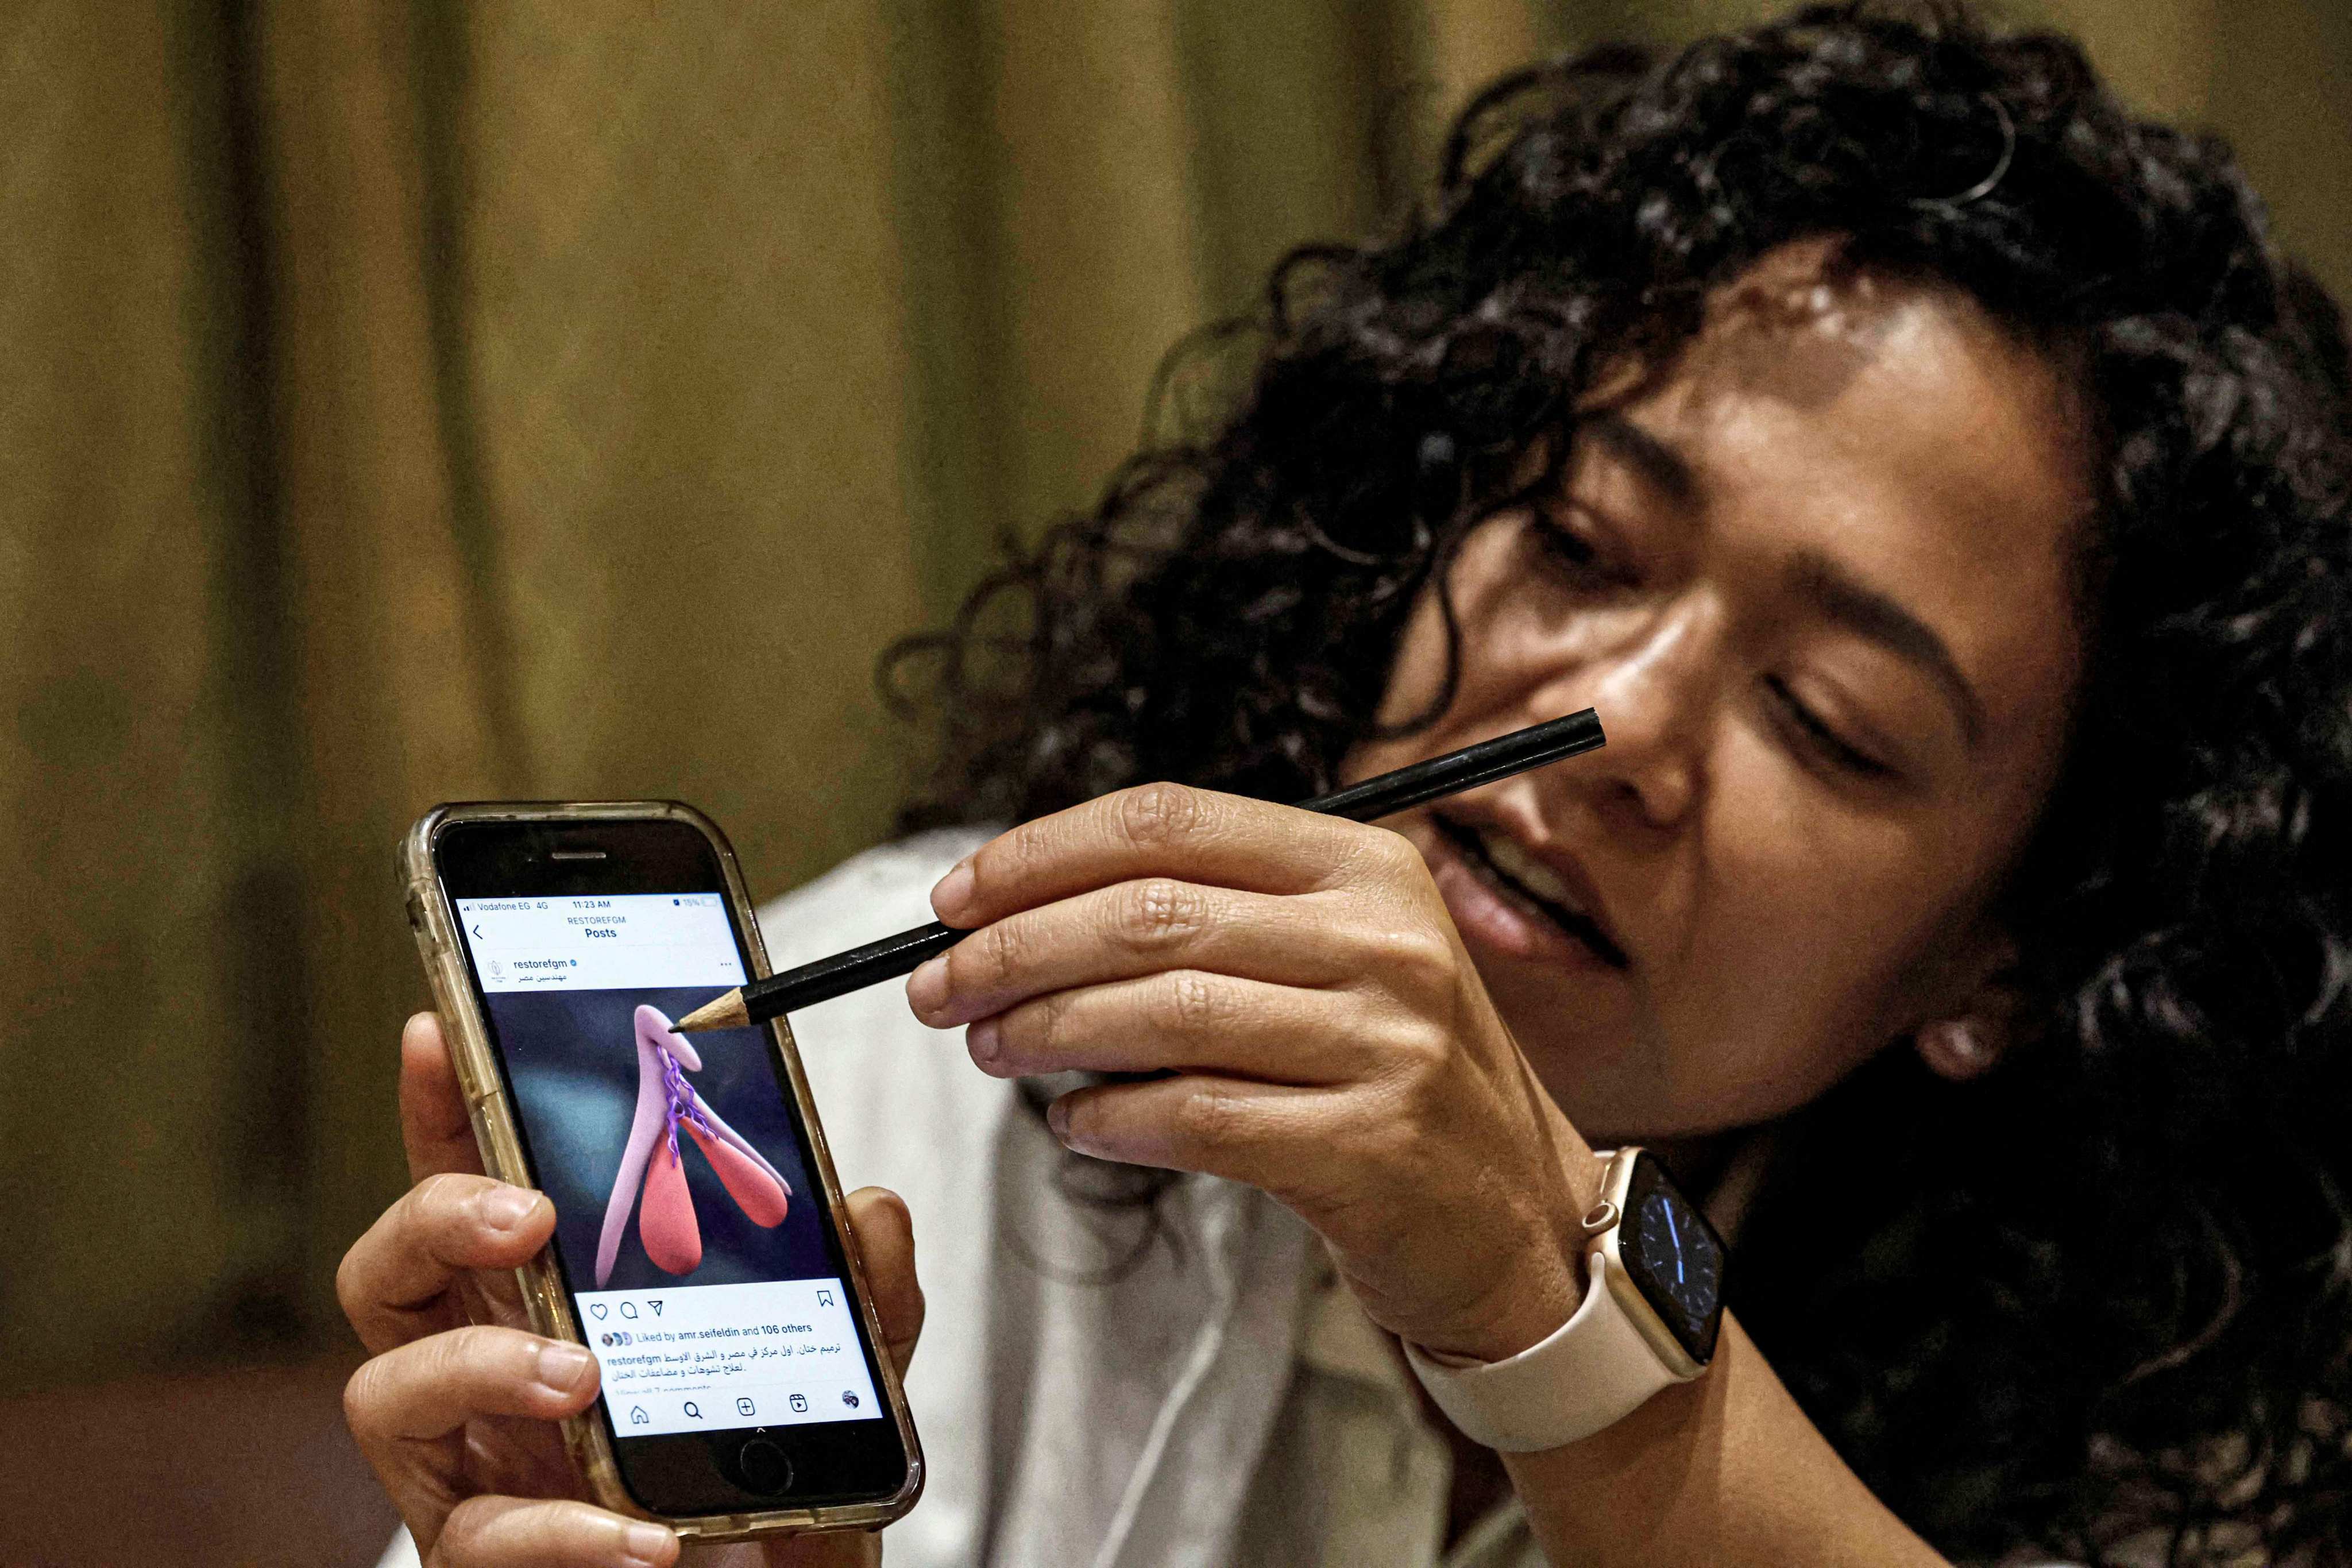 Dr Reham Awwad uses an illustration on a phone to describe clitoral reconstruction surgery at the Restore FGM clinic in Cairo. In Egypt, 86 per cent of ever-married women aged 15 to 49 have undergone female genital mutilation (FGM). Photo: AFP